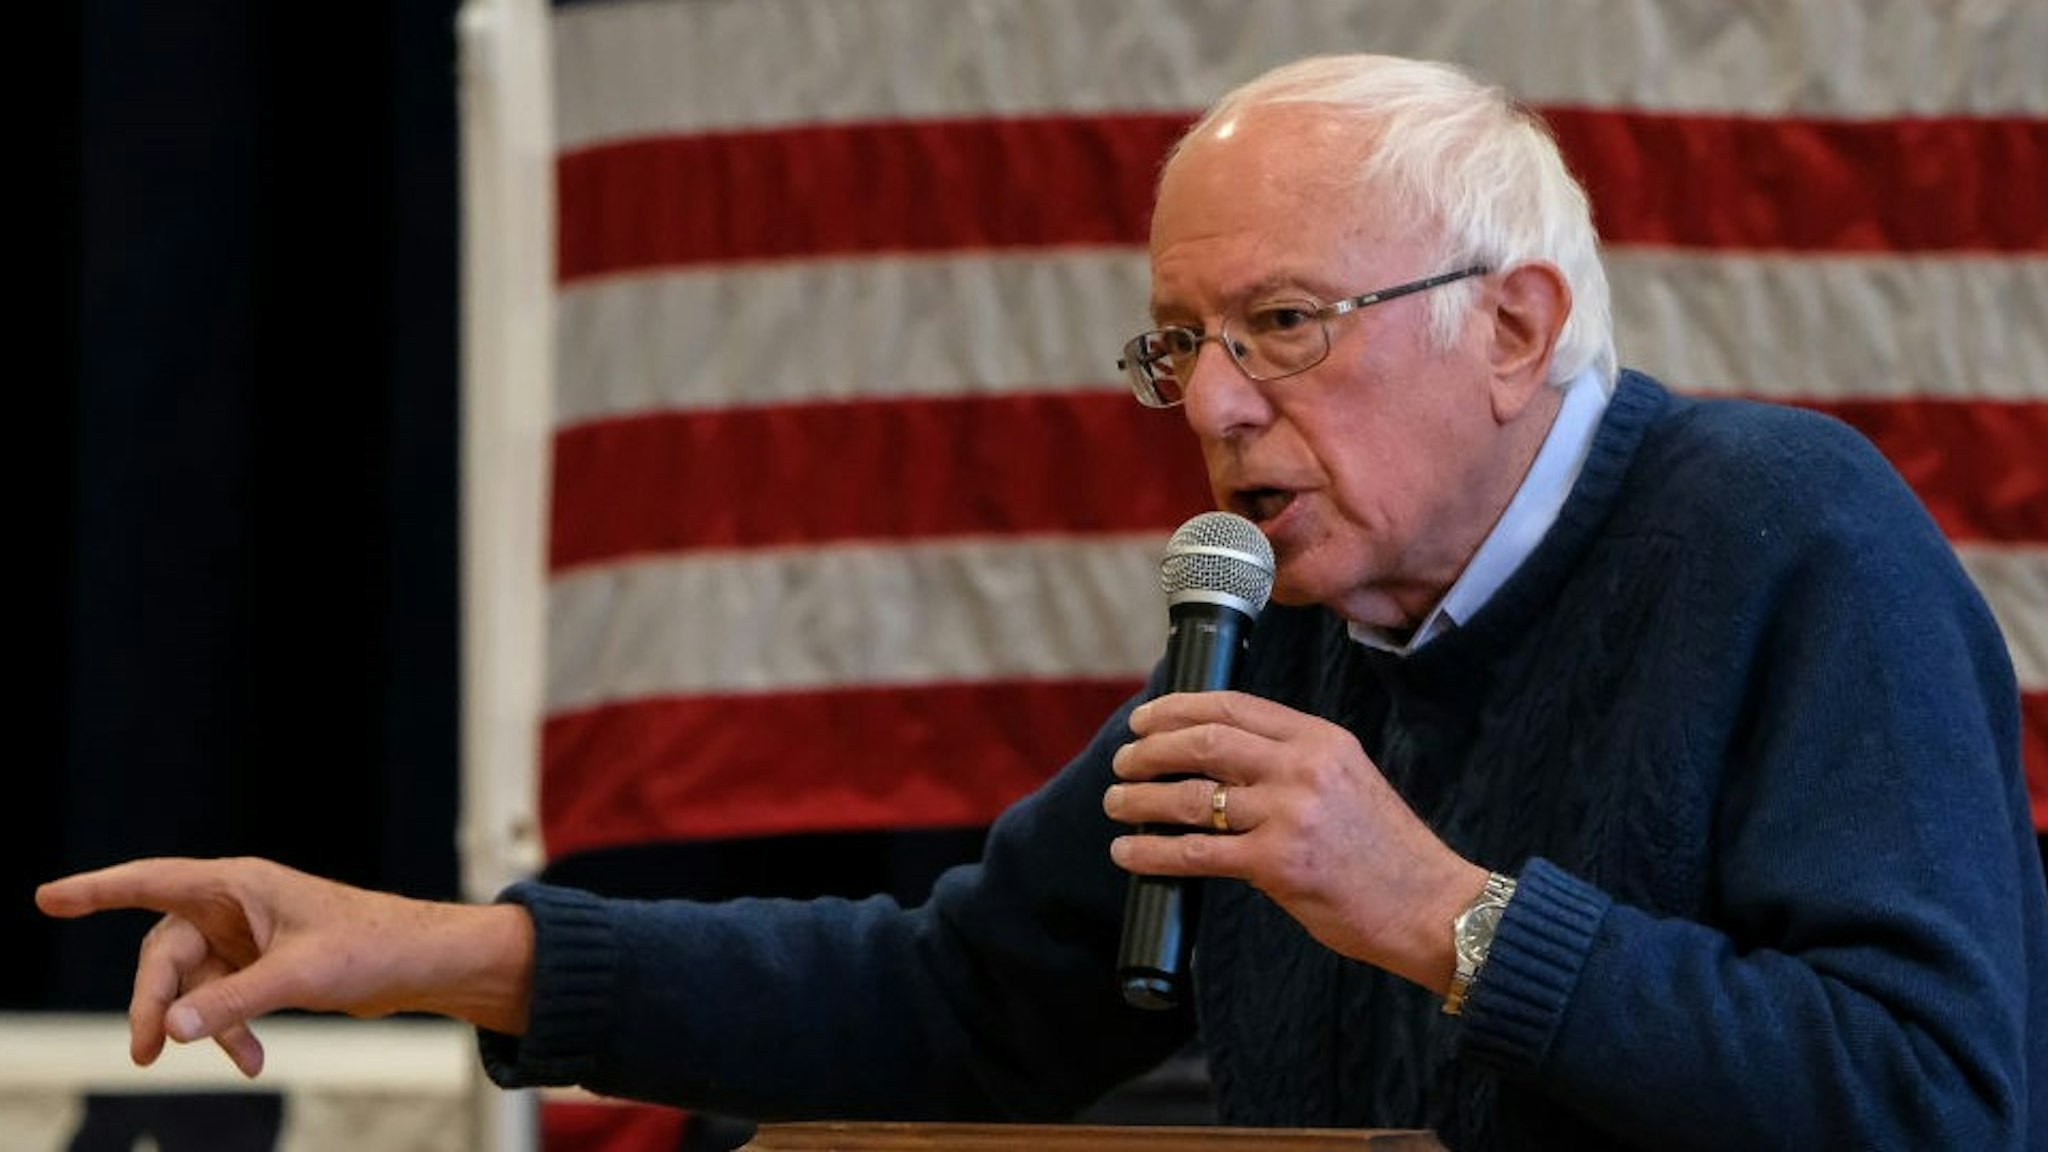 FRANKLIN, UNITED STATES - 2019/11/23: Presidential candidate Bernie Sanders addresses his supporters in Franklin his a campaign ahead of the presidential election. (Photo by